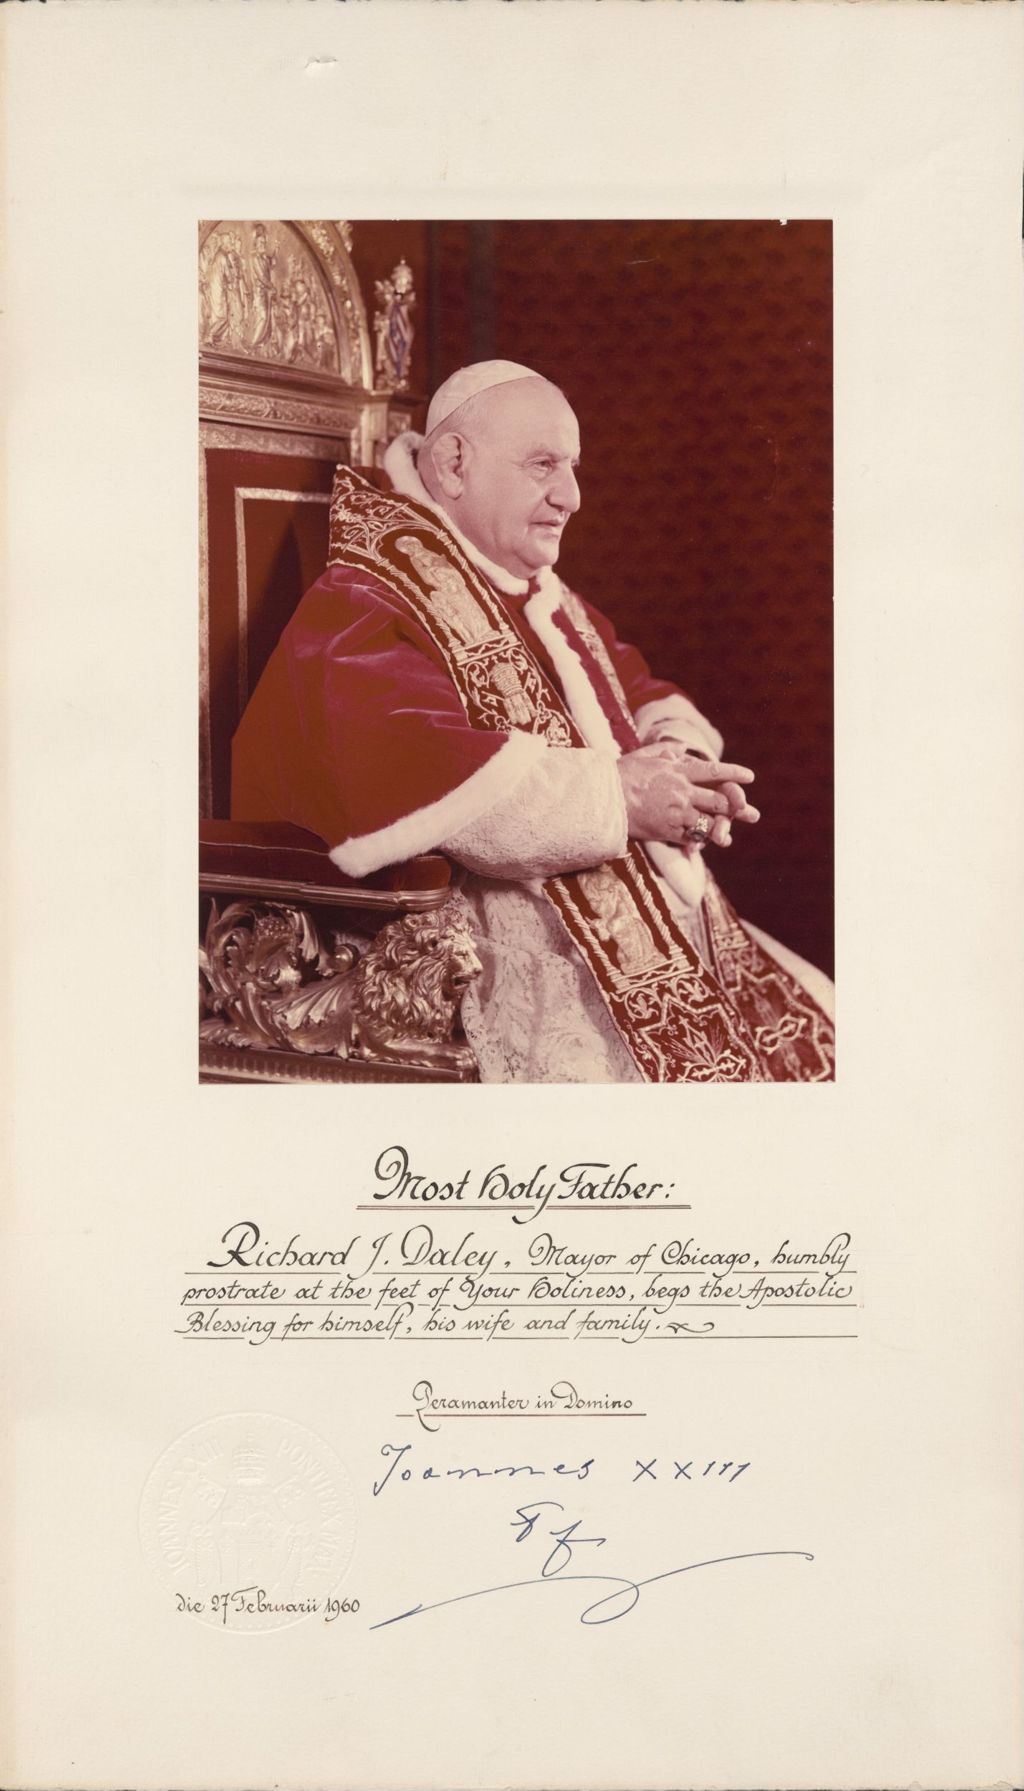 Miniature of Papal blessing card from Pope John XXII for Richard J. Daley and family